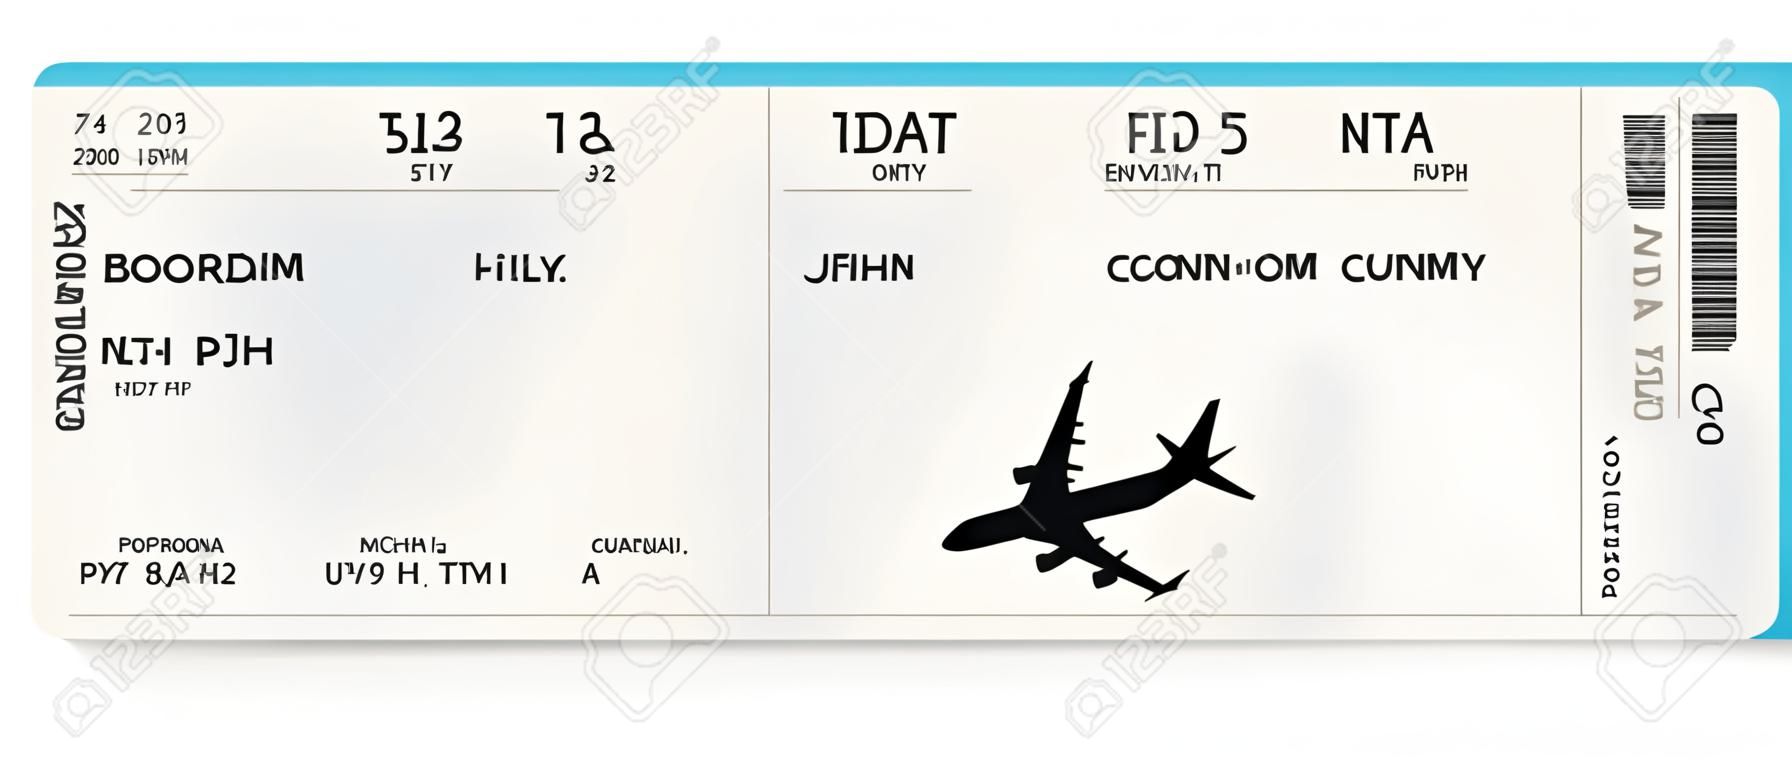 Blue realistic airline ticket or boarding pass design with unreal flight time and passenger name. Vector illustration of pattern of a boarding pass